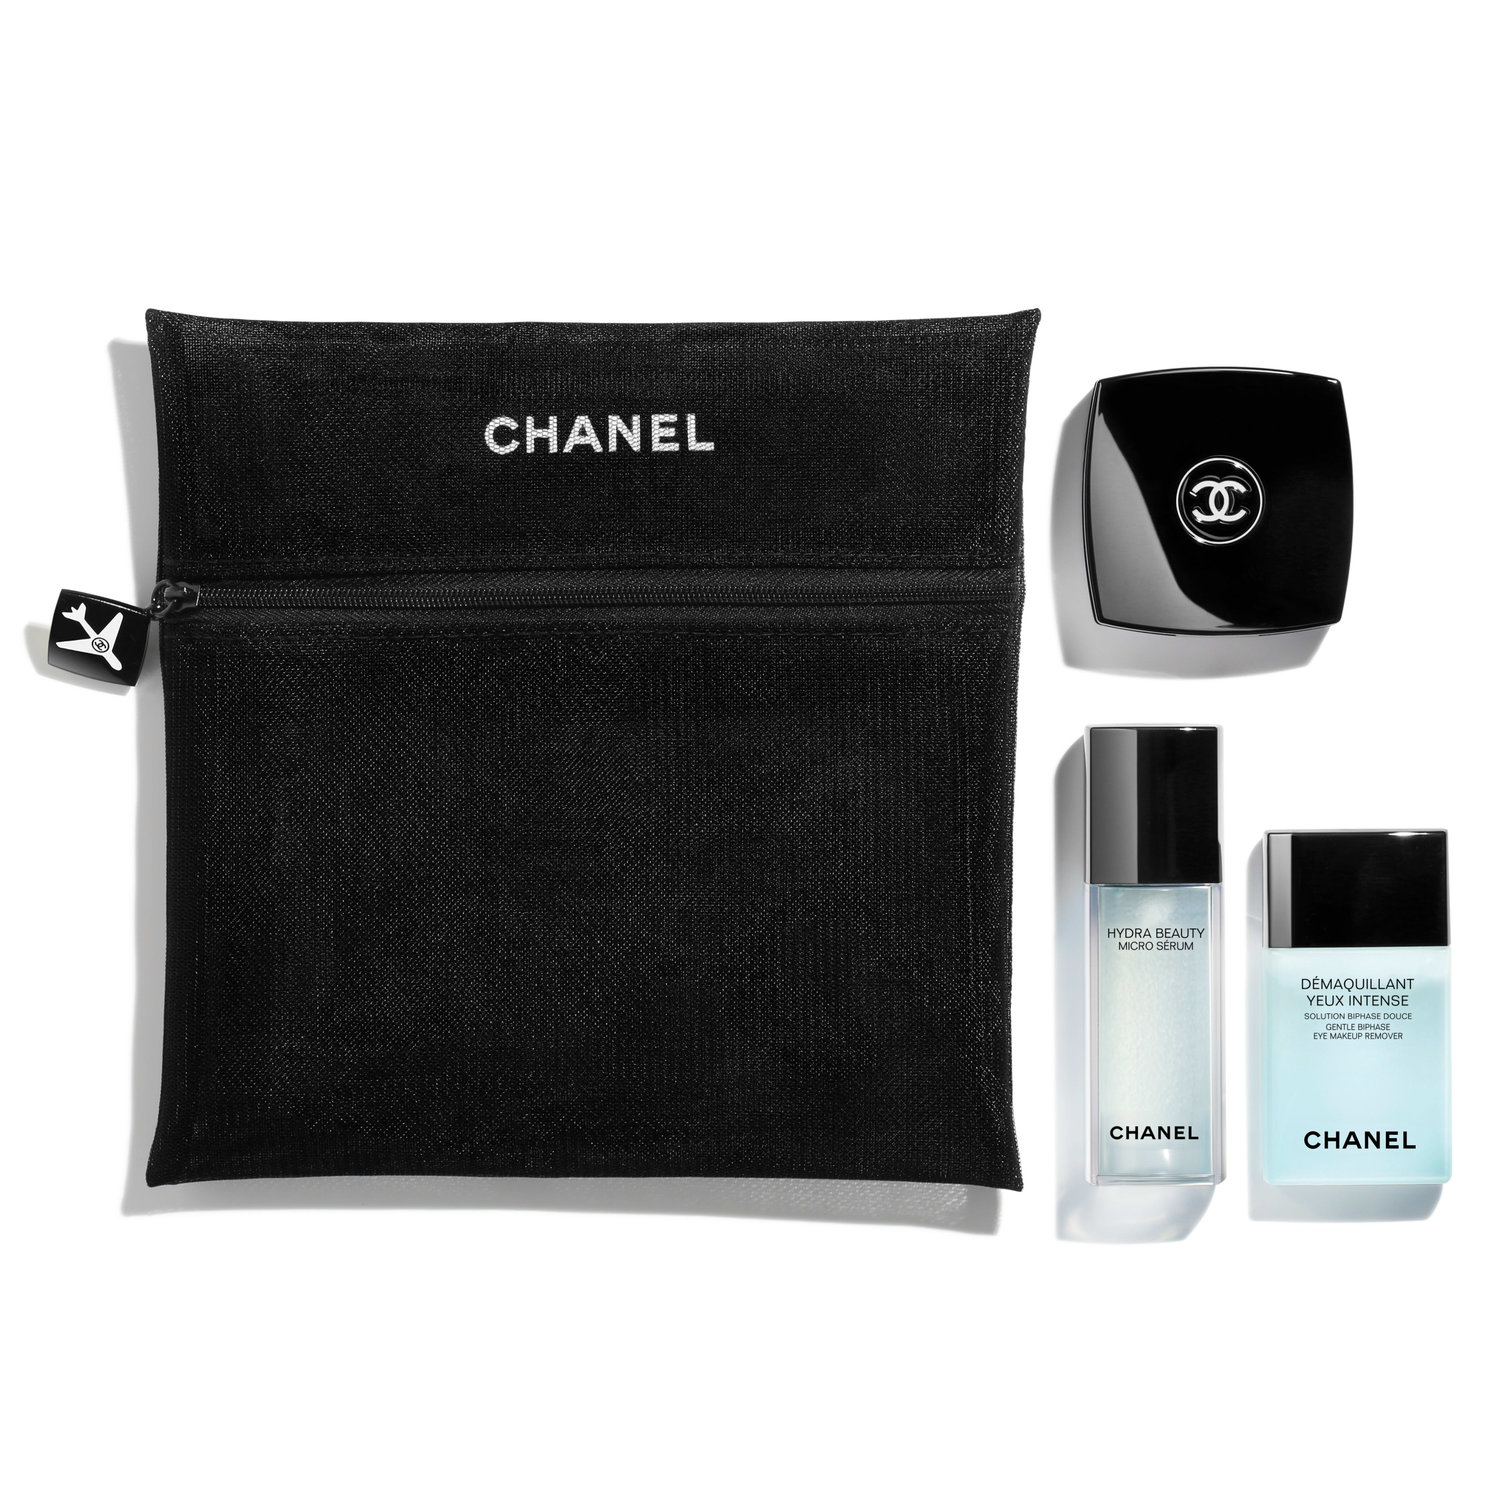 Chanel Travel Set is the Couture Skin Saviour | Couture Feast